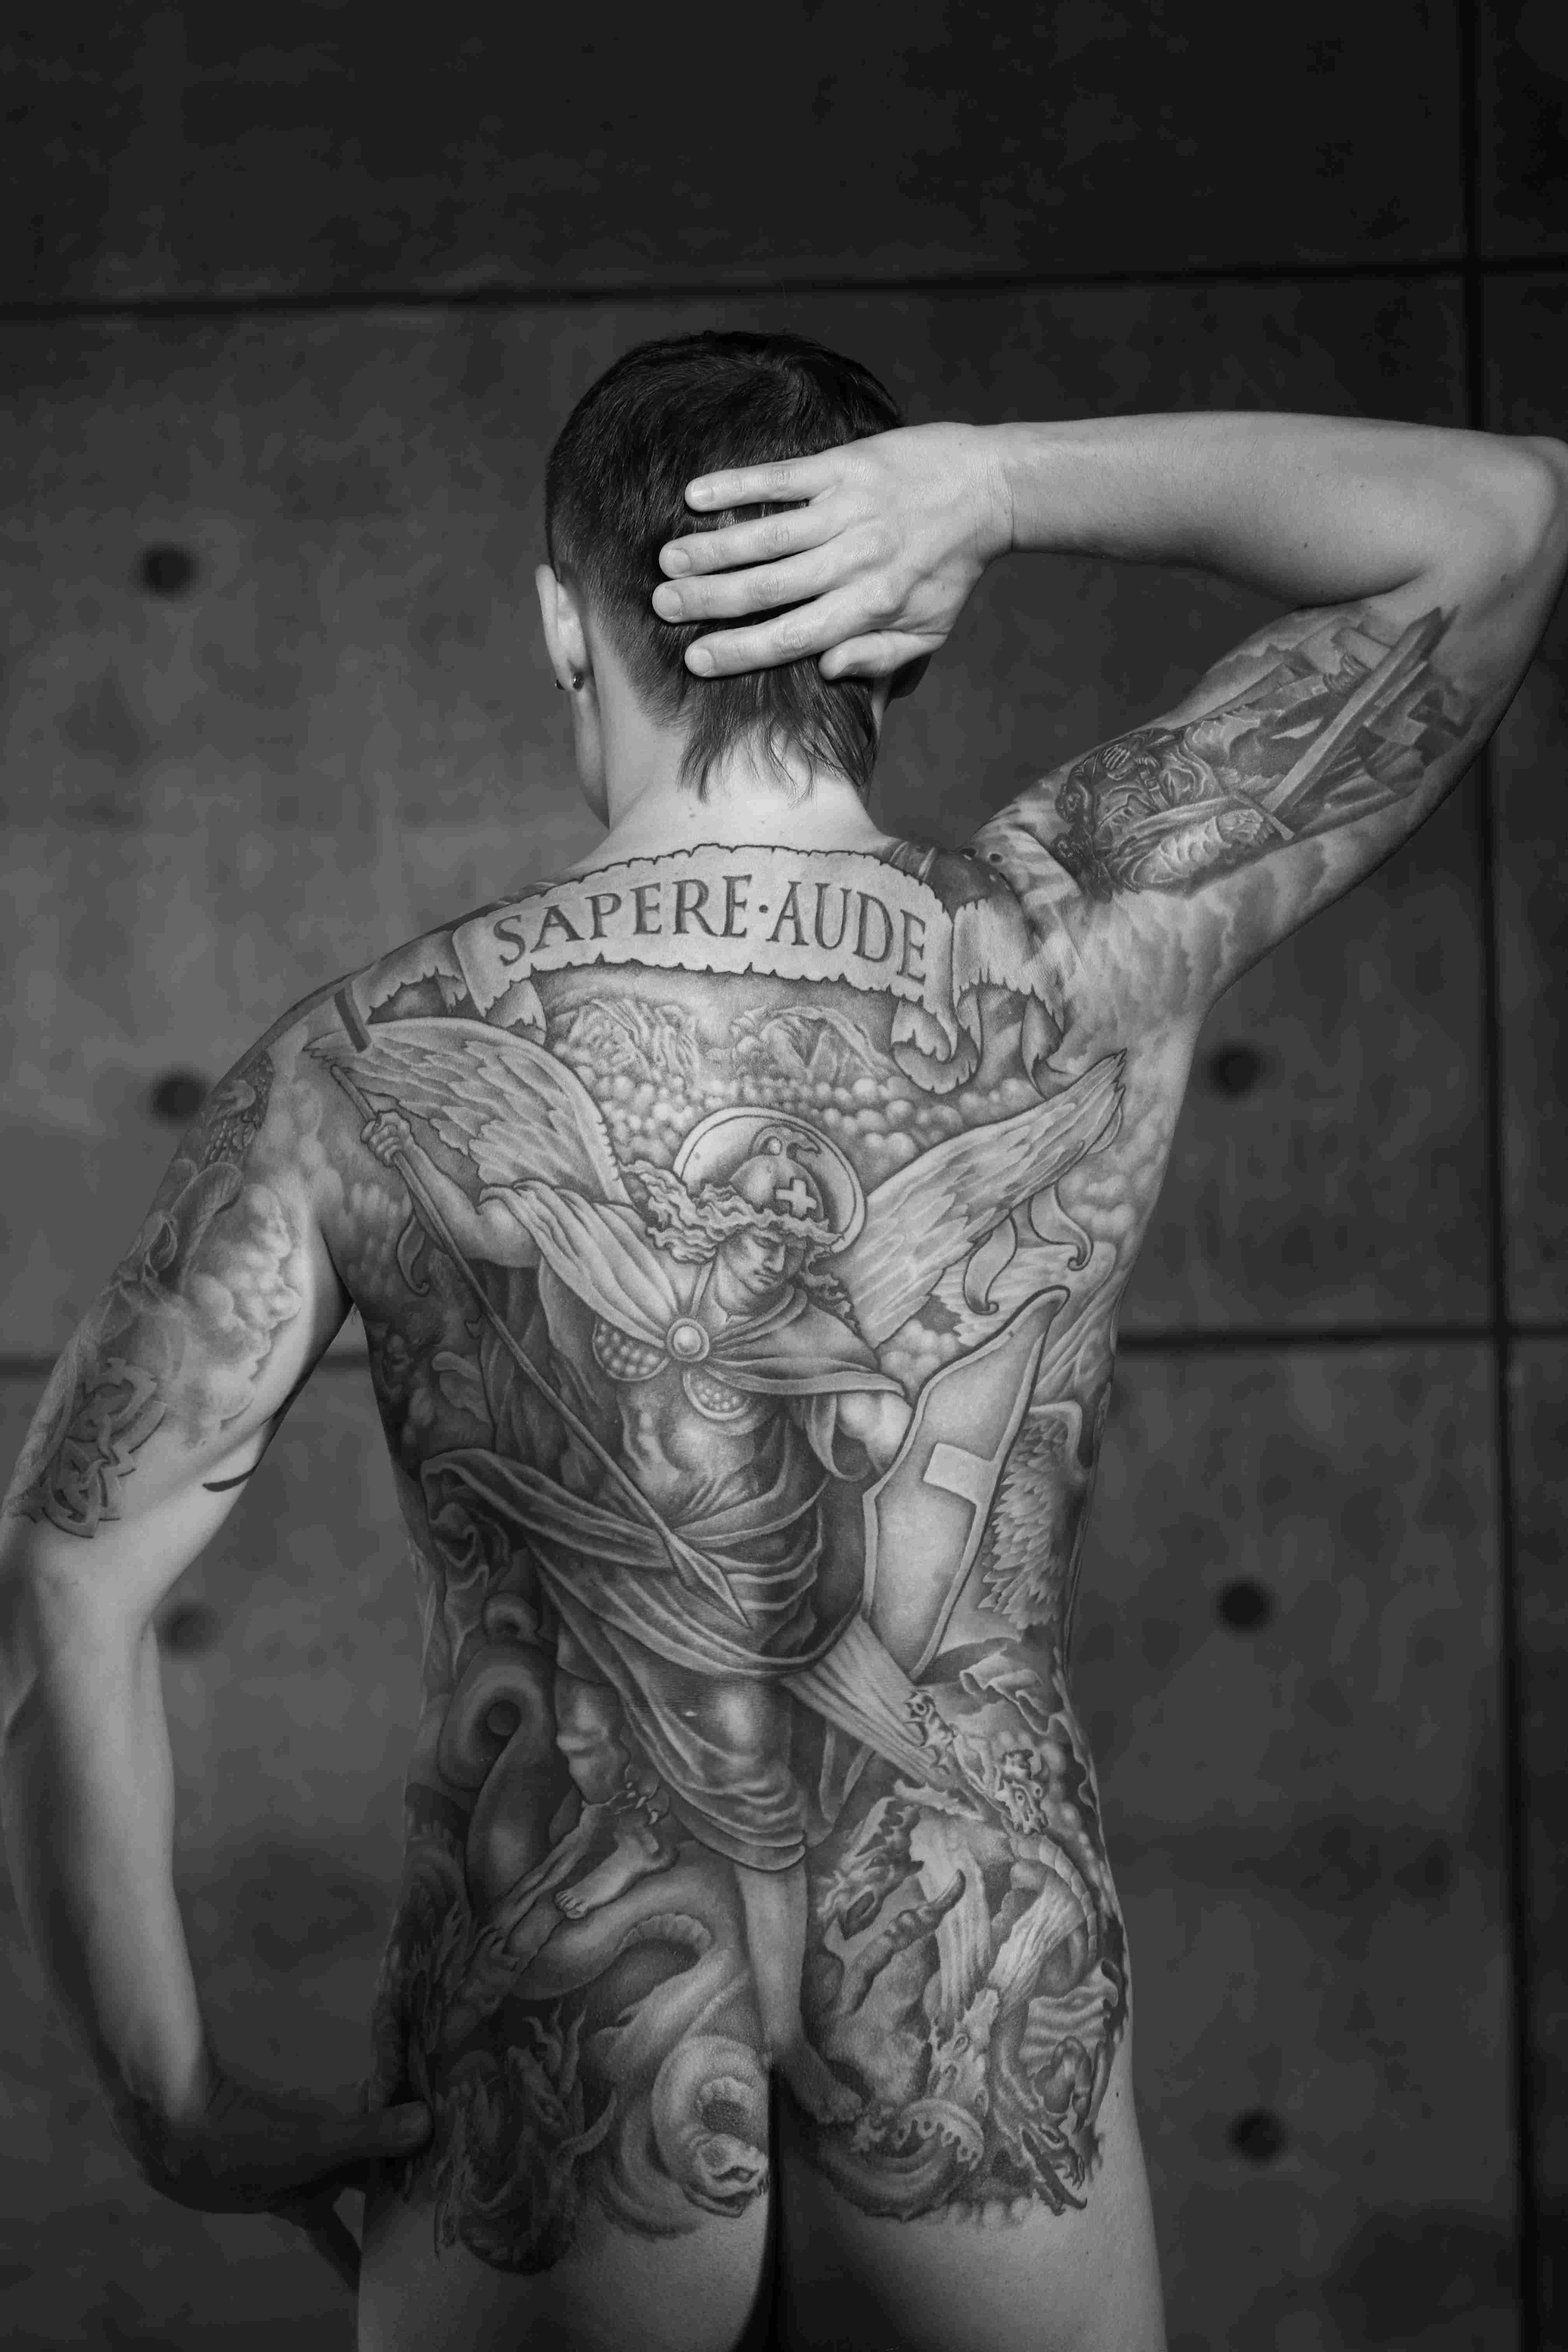 Images Wikimedia Commons/25 Alexander Kuzovlev Man_with_a_full_back_tattoo.jpg